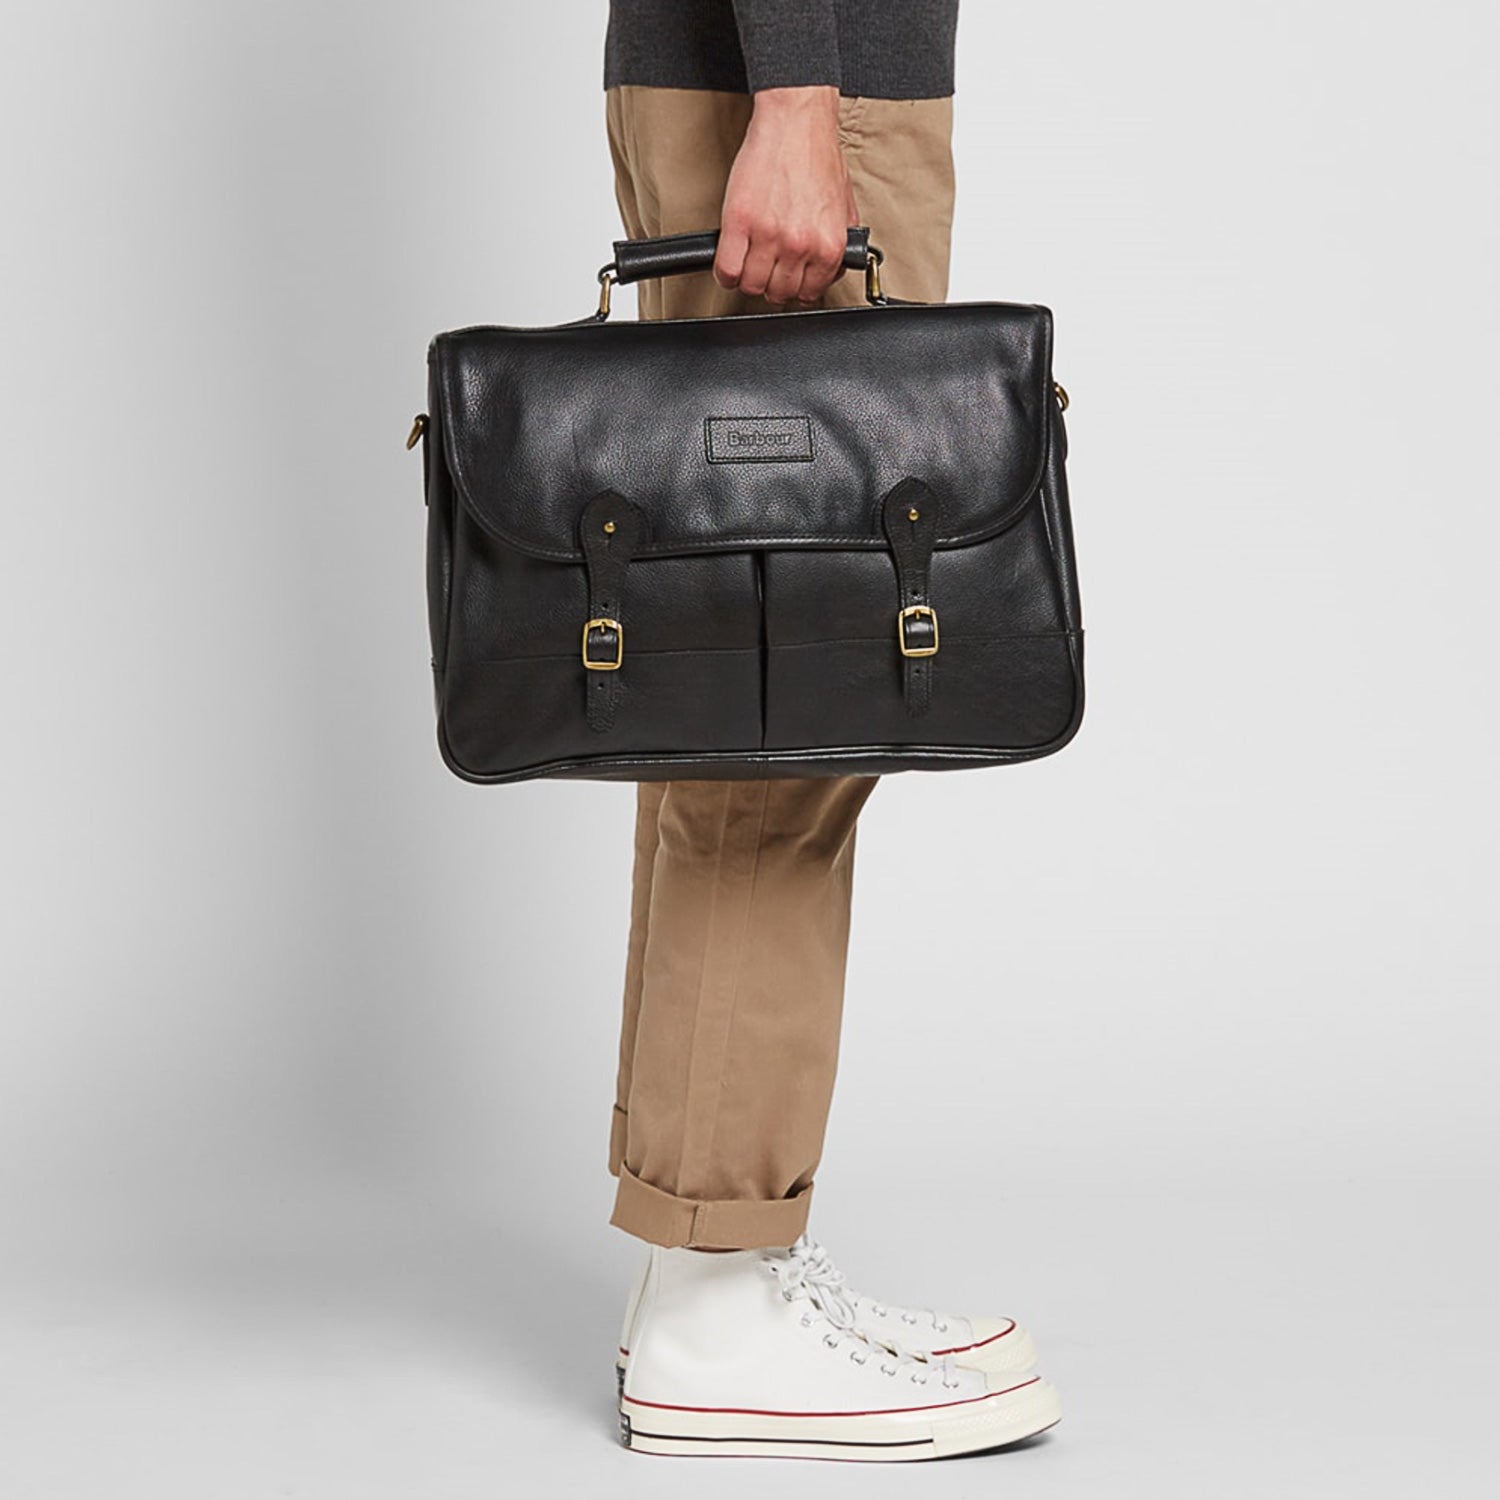 barbour briefcases uk